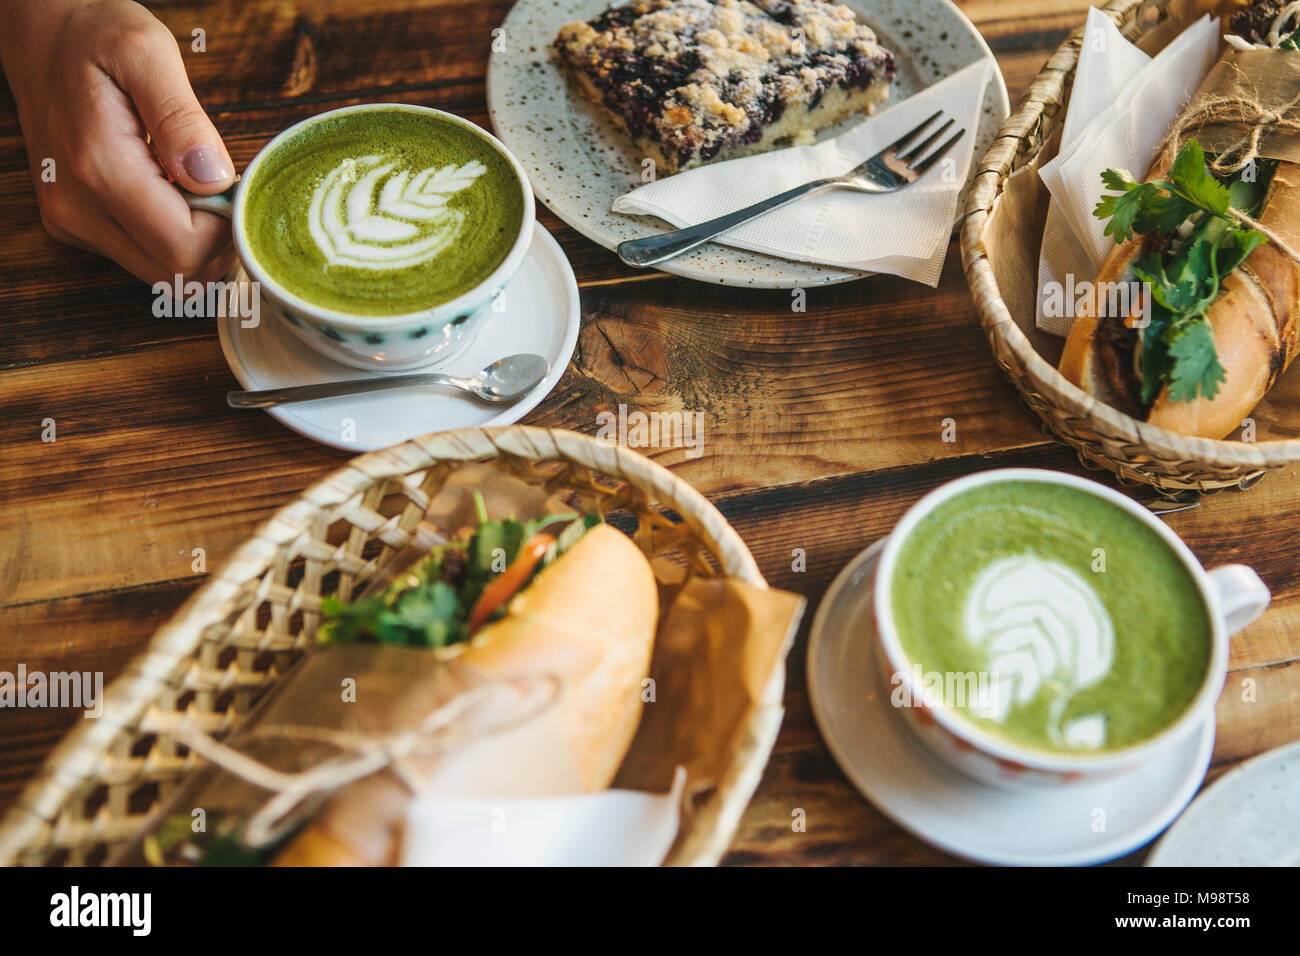 Top view. The girl sitting in cafe and holding mug with green tea with milk next to piece of sweet pie and two sandwiches with vegetables Stock Photo